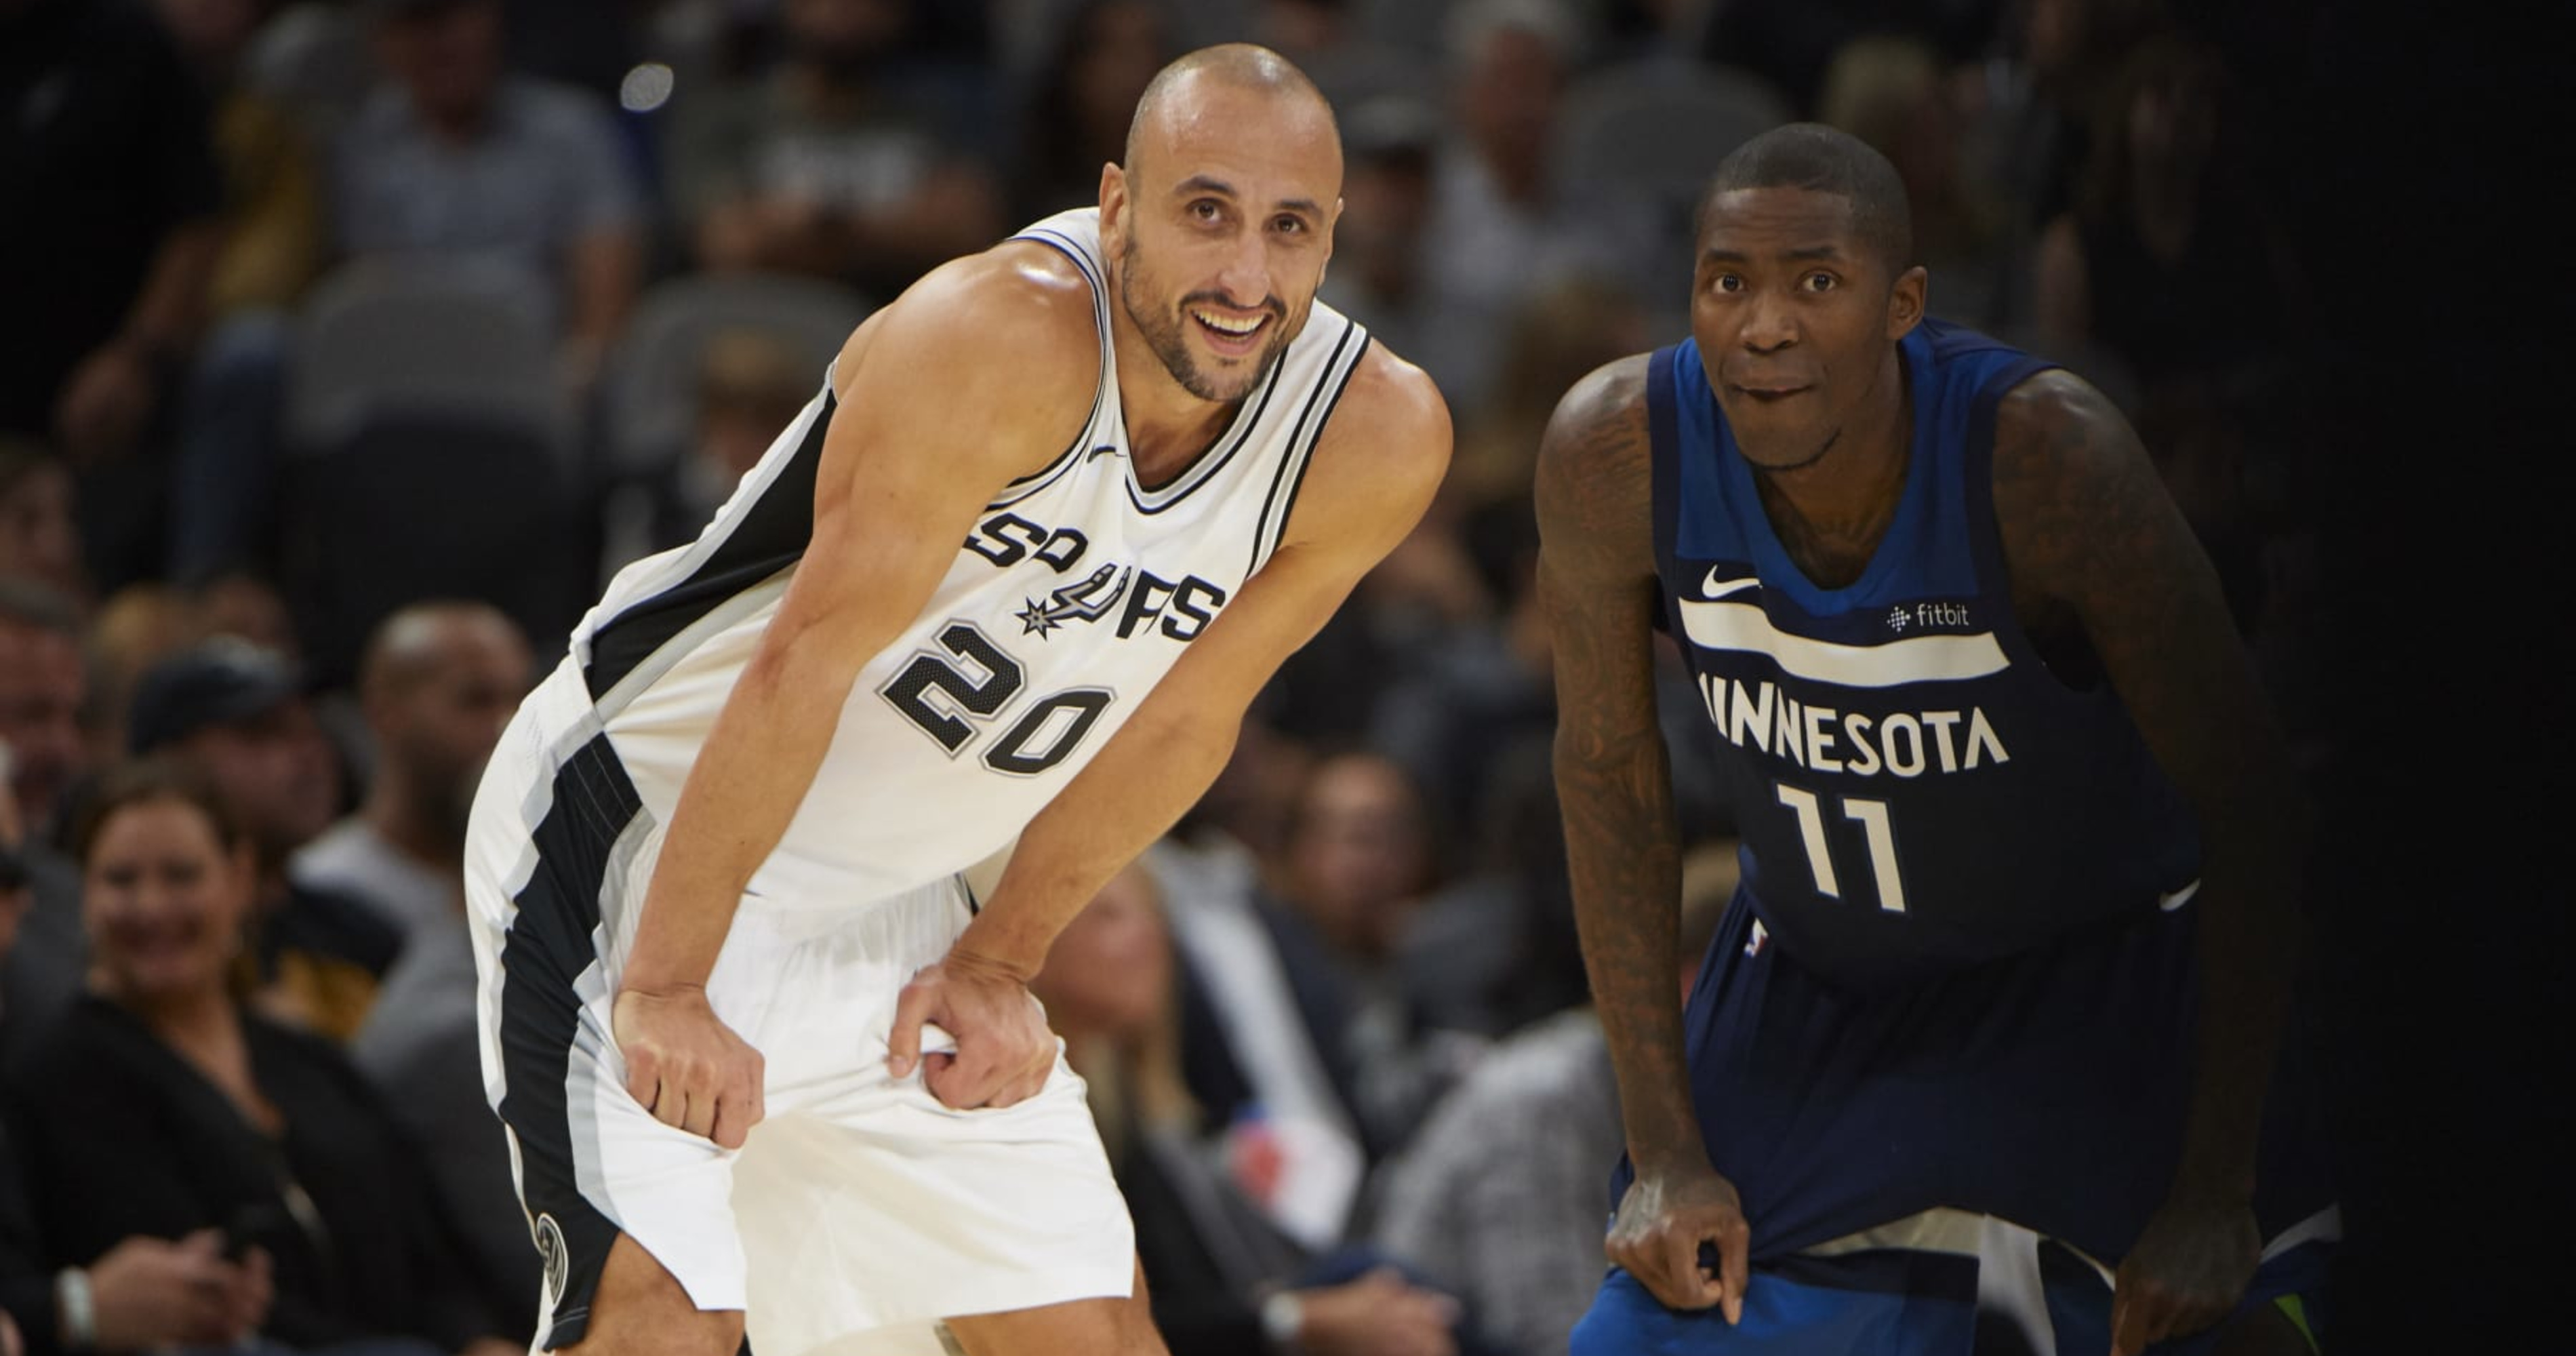 With enshrinement complete, Hall Of Famer Manu Ginobili caps